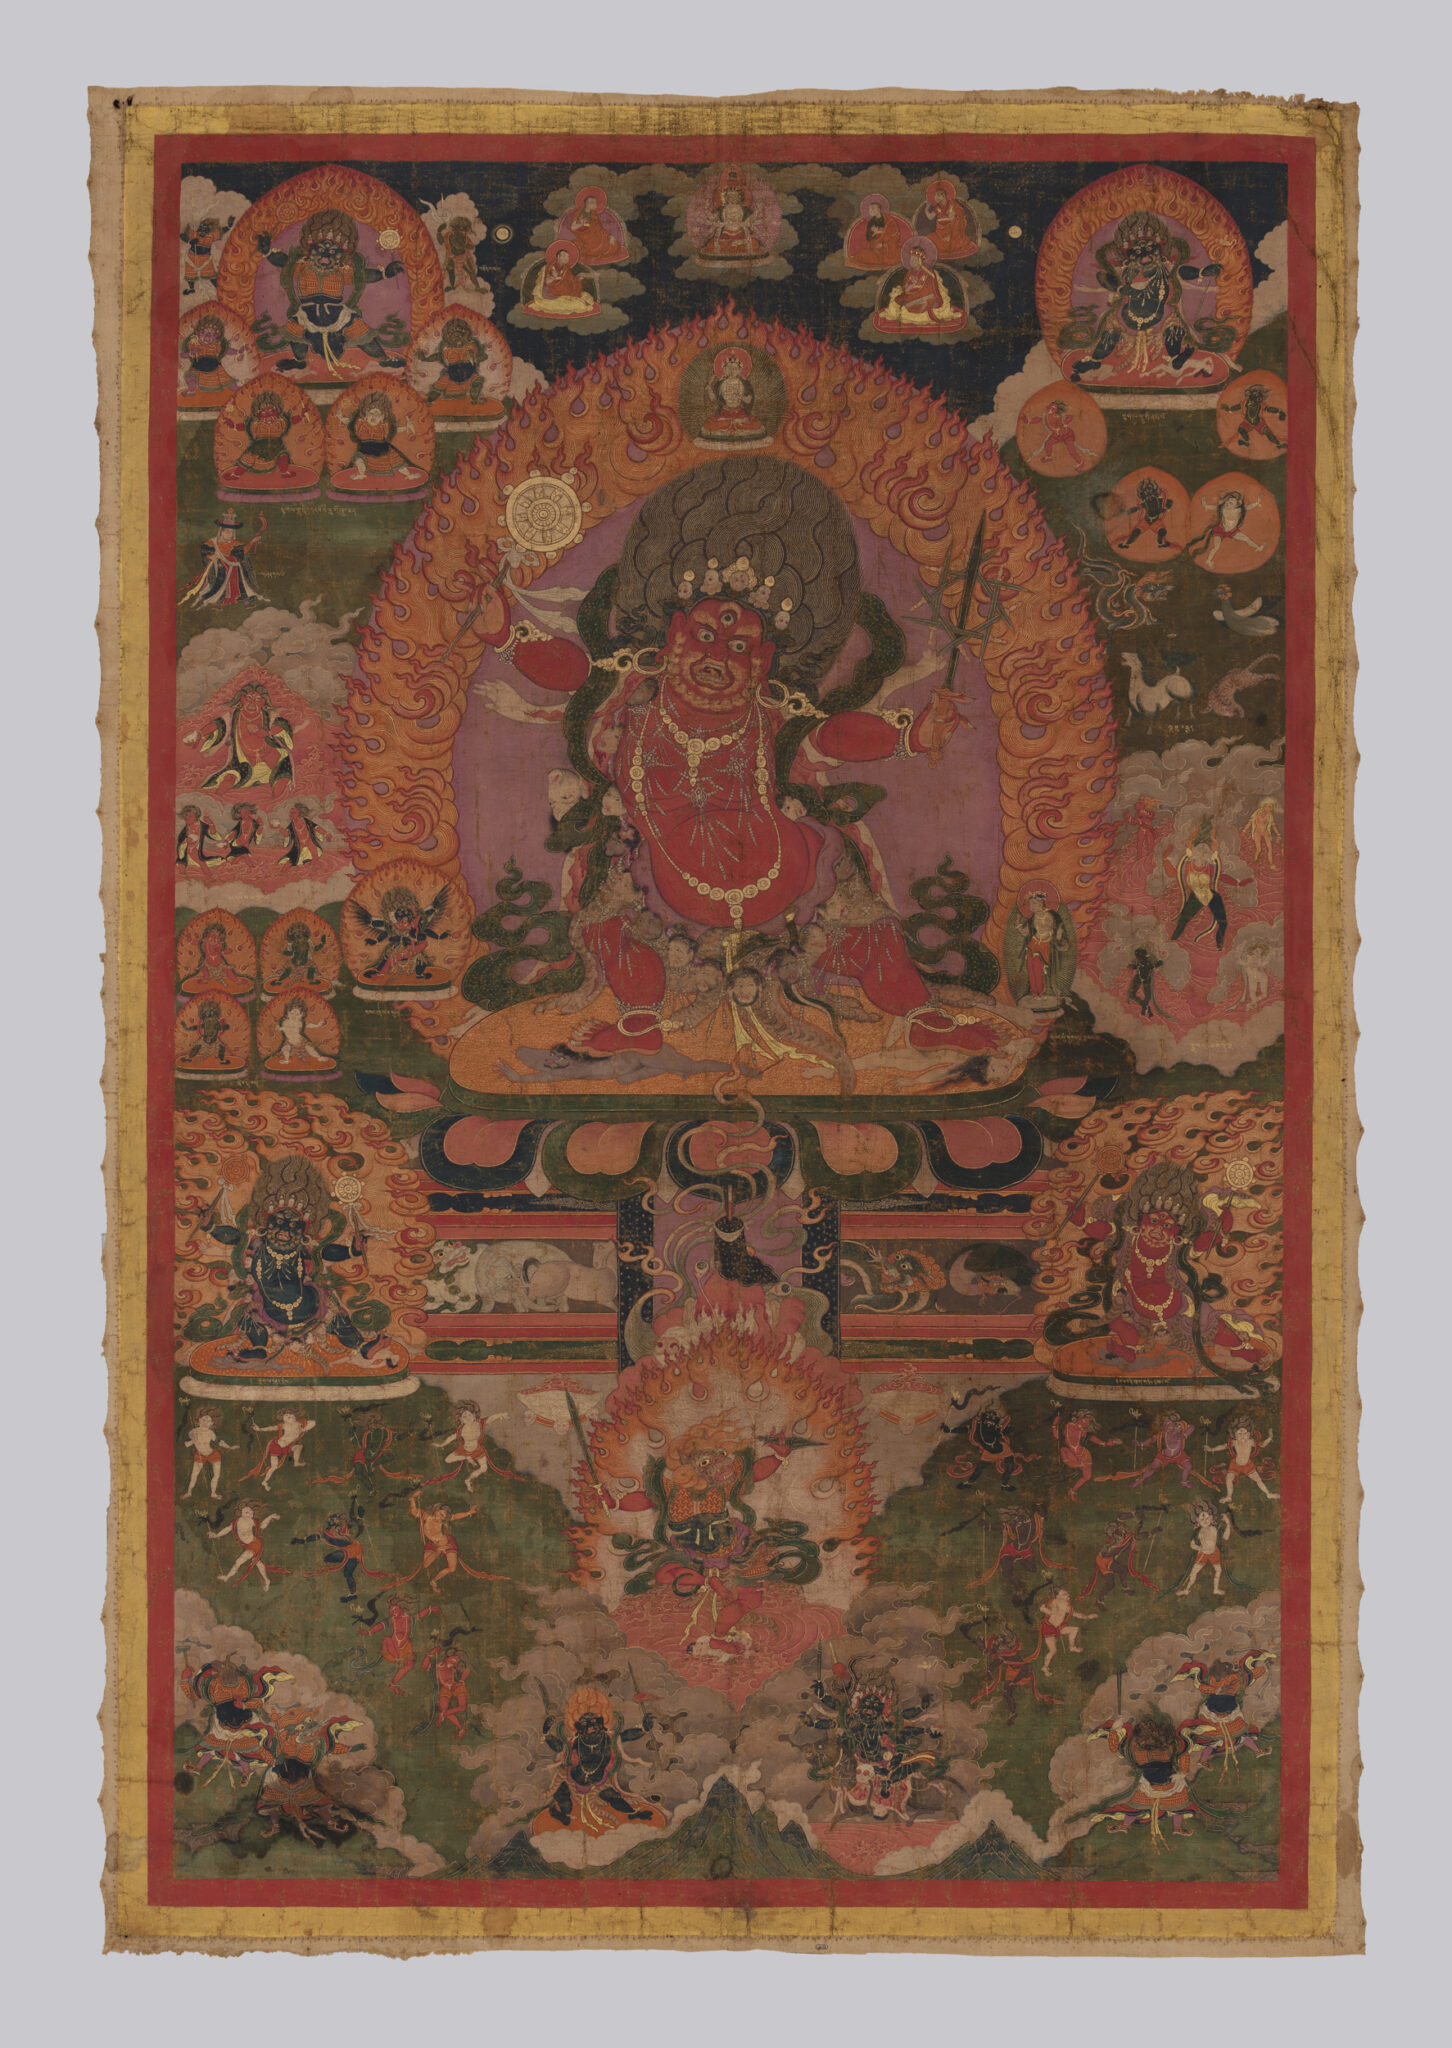 Wrathful deity stands in dynamic pose before fiery nimbus, surrounded by deity portraits